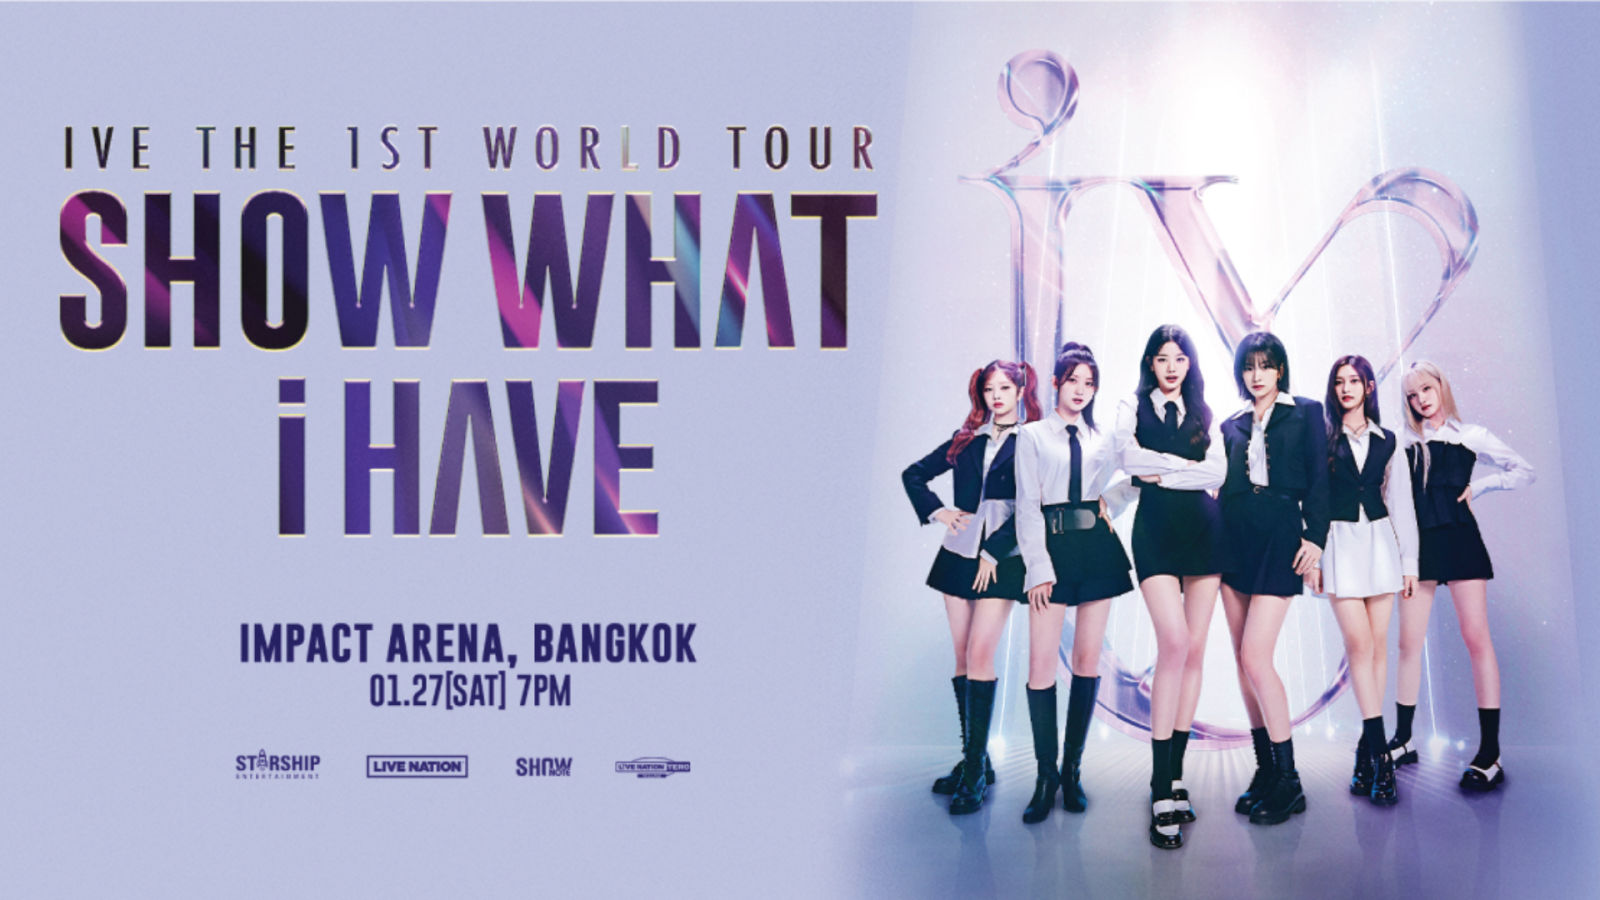 IVE THE 1ST WORLD TOUR ＜SHOW WHAT I HAVE＞ IN BANGKOK